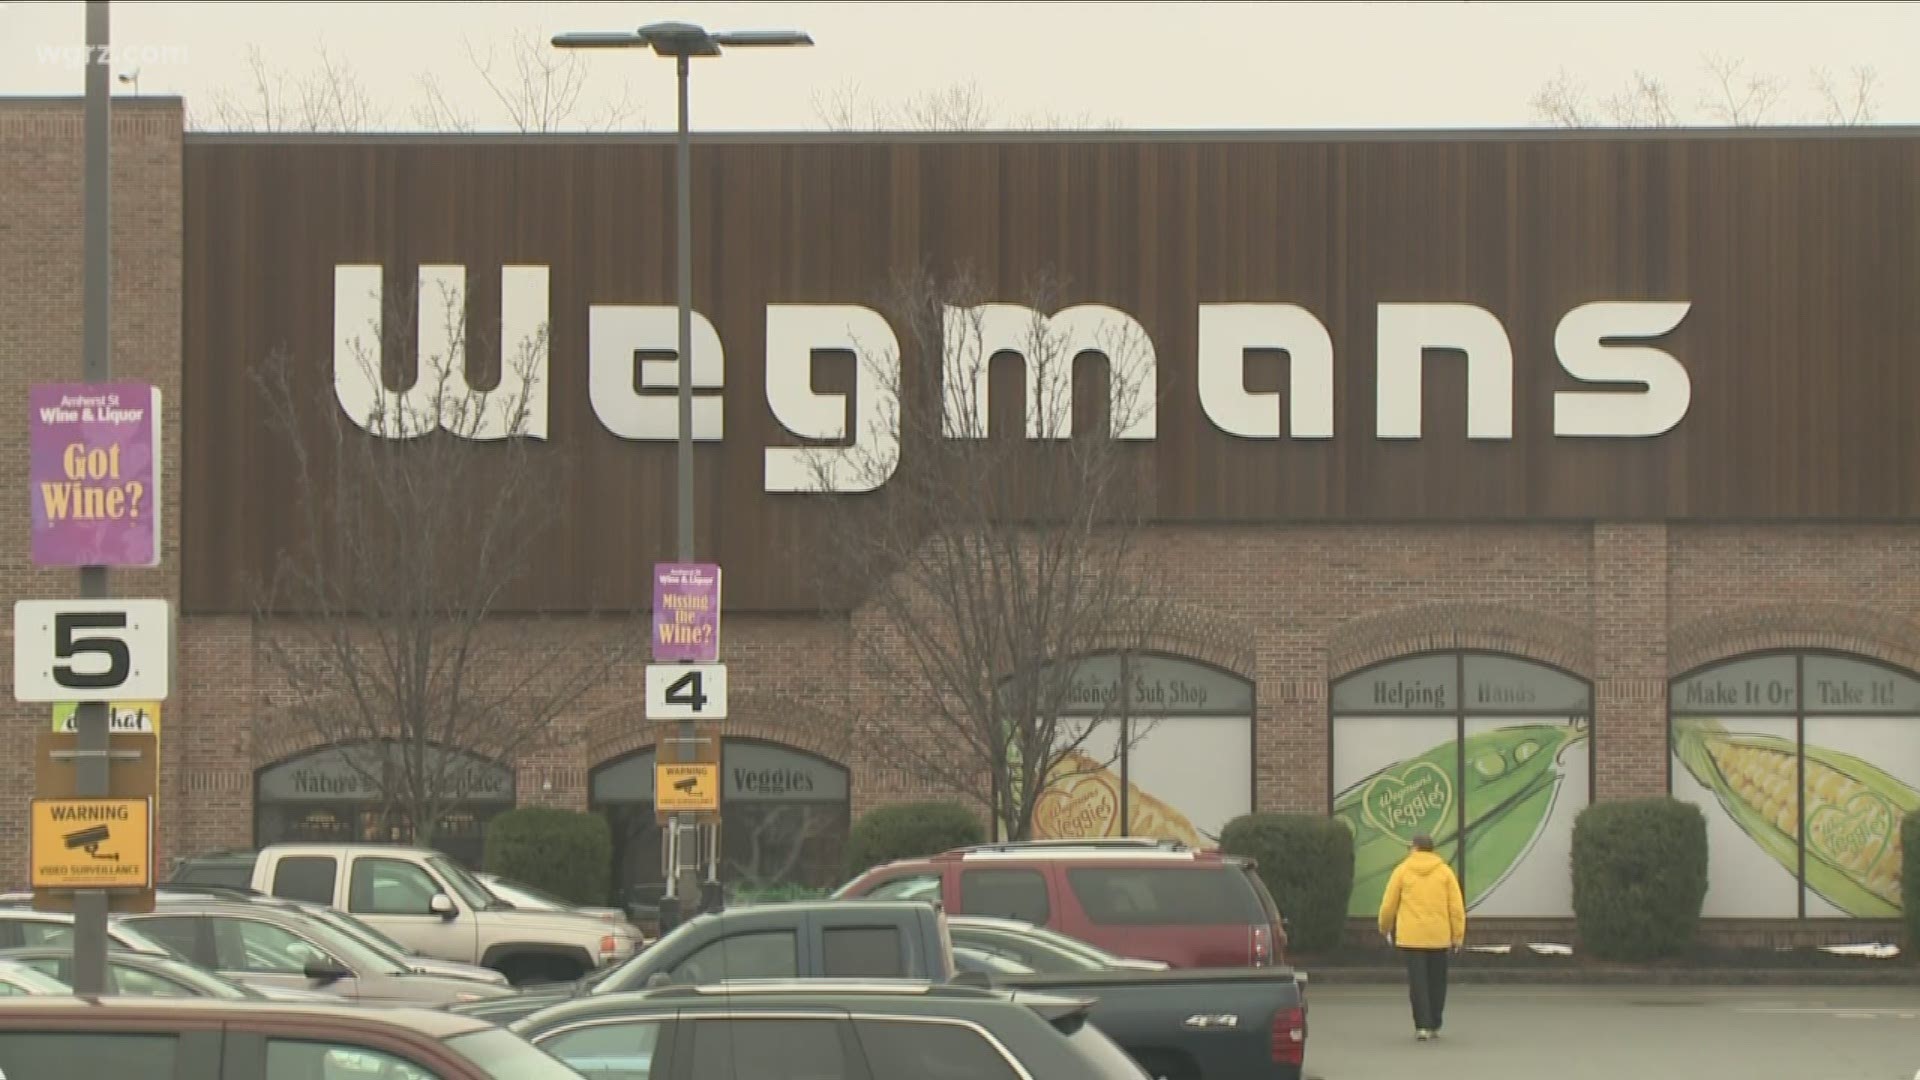 Wegmans named one of the best companies to work for by Fortune magazine